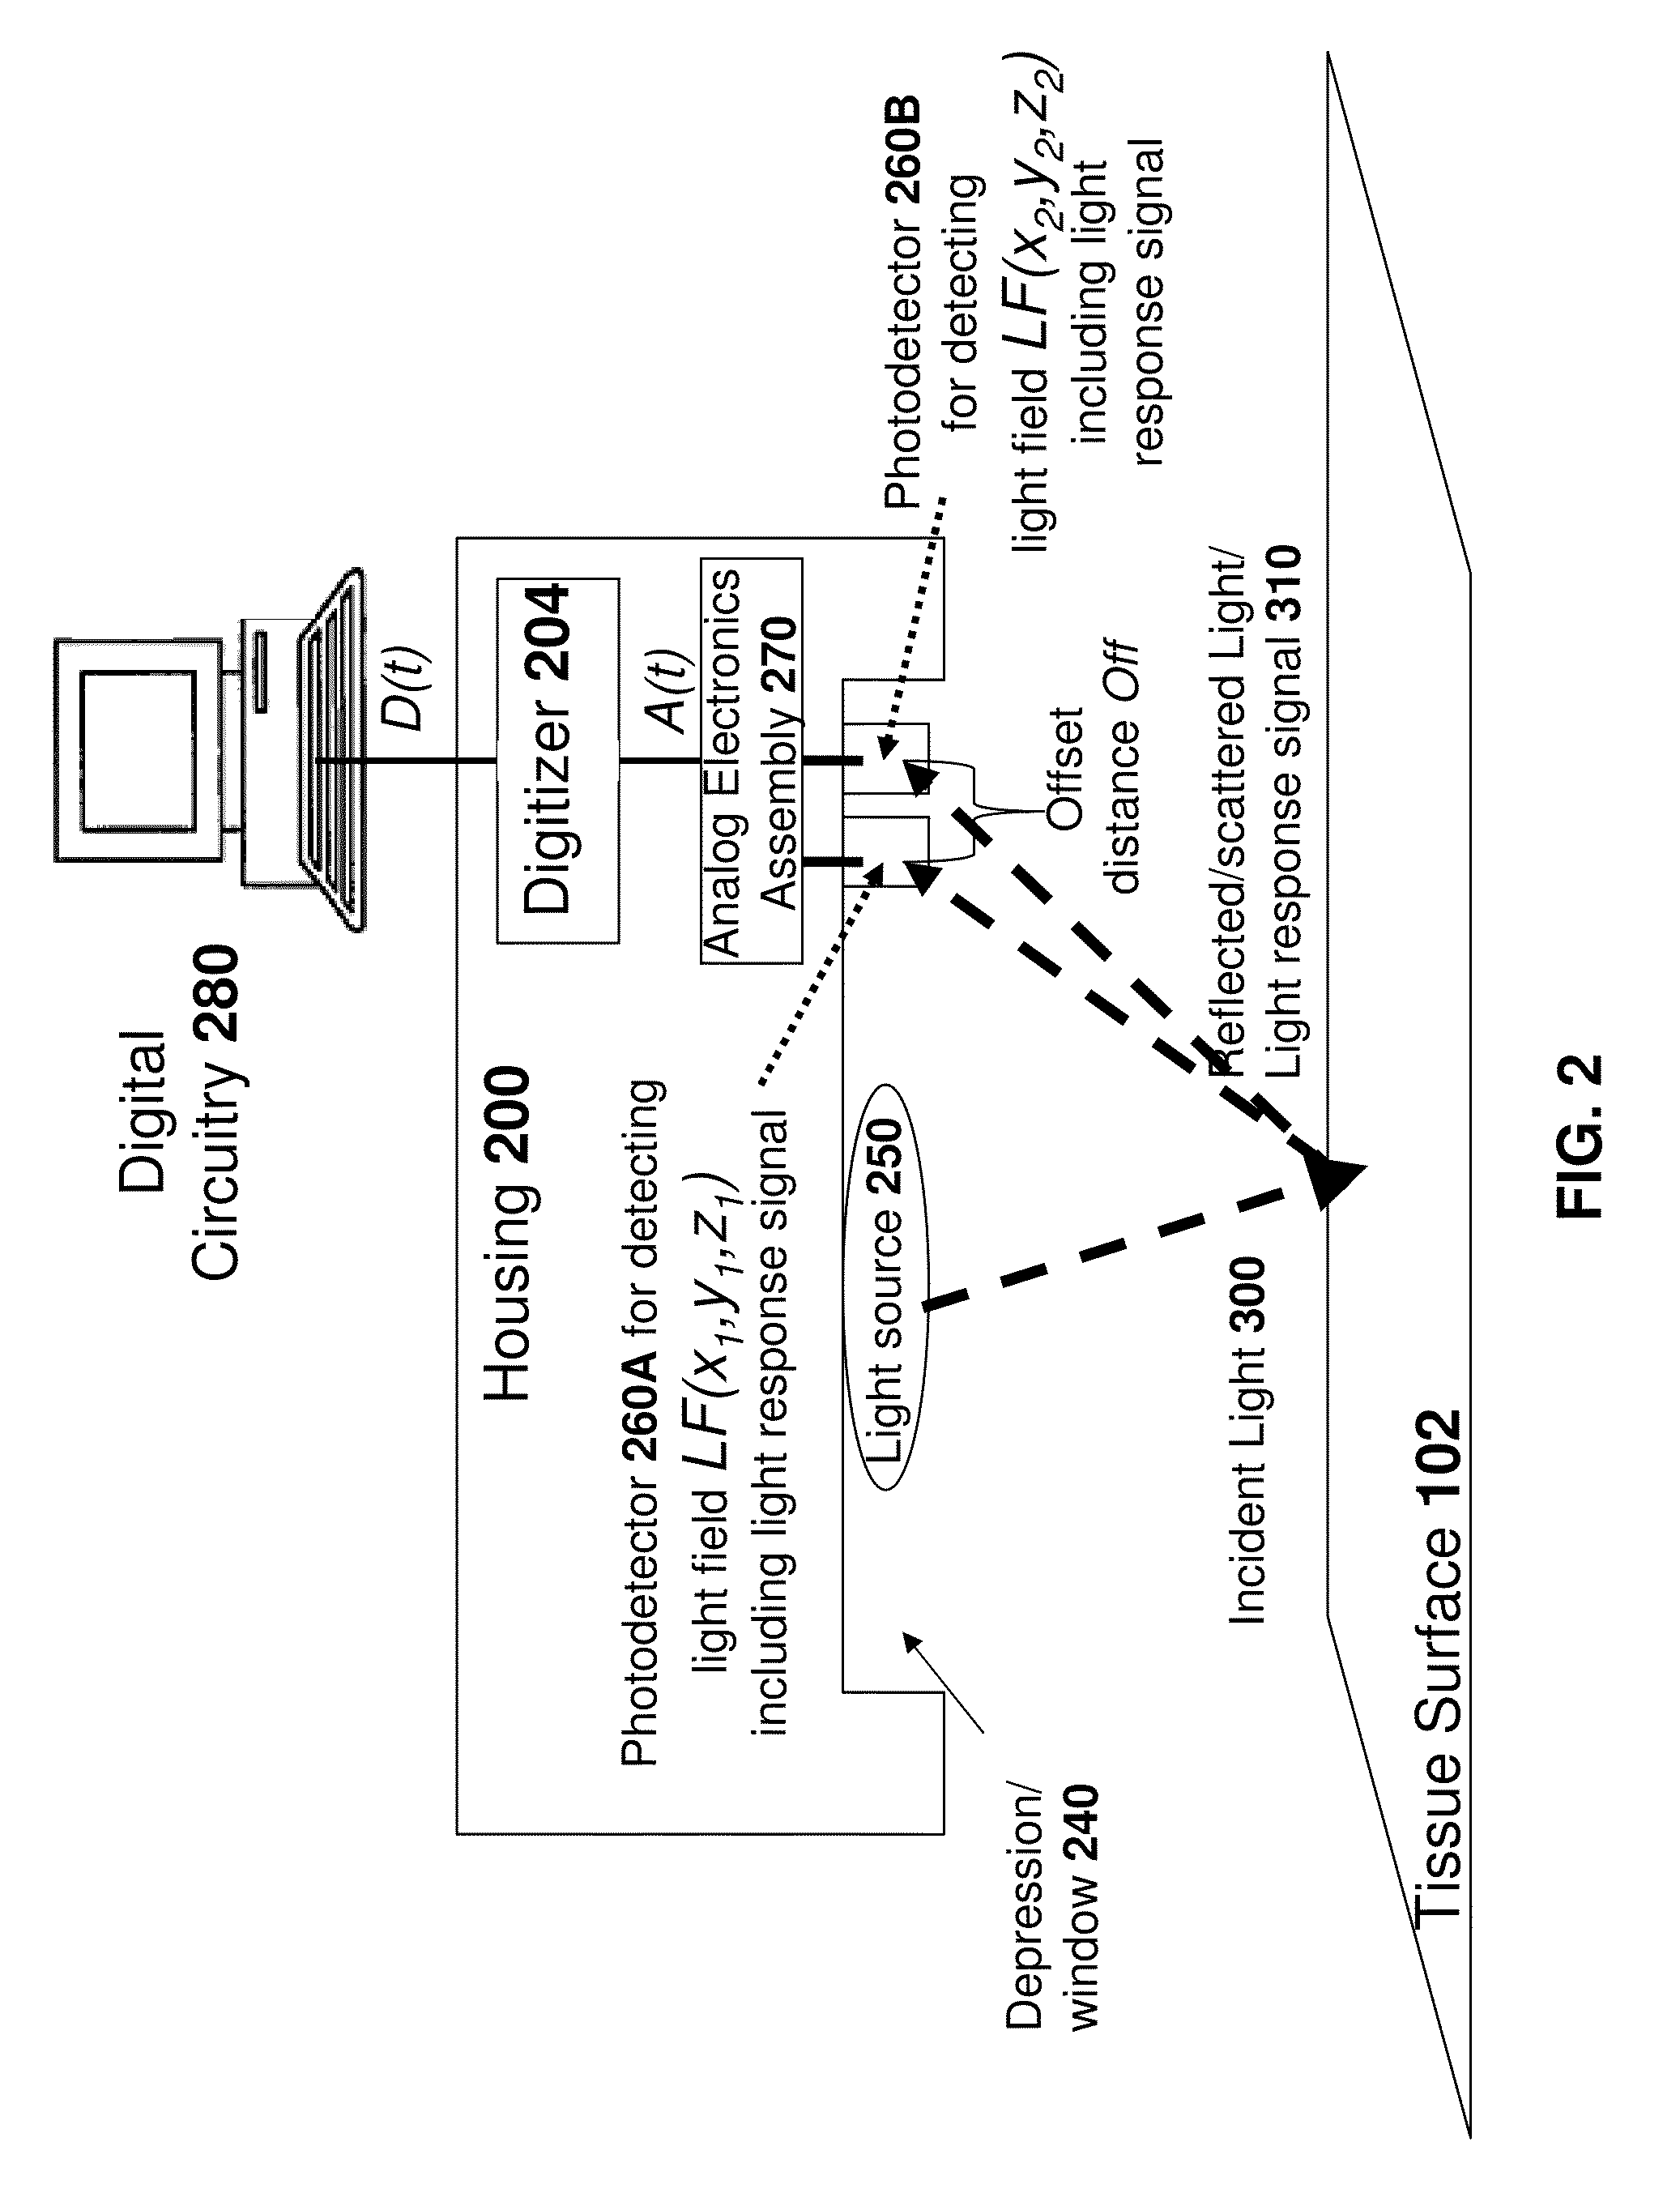 Method and Apparatus for Determining One or More Blood Parameters From Analog Electrical Signals